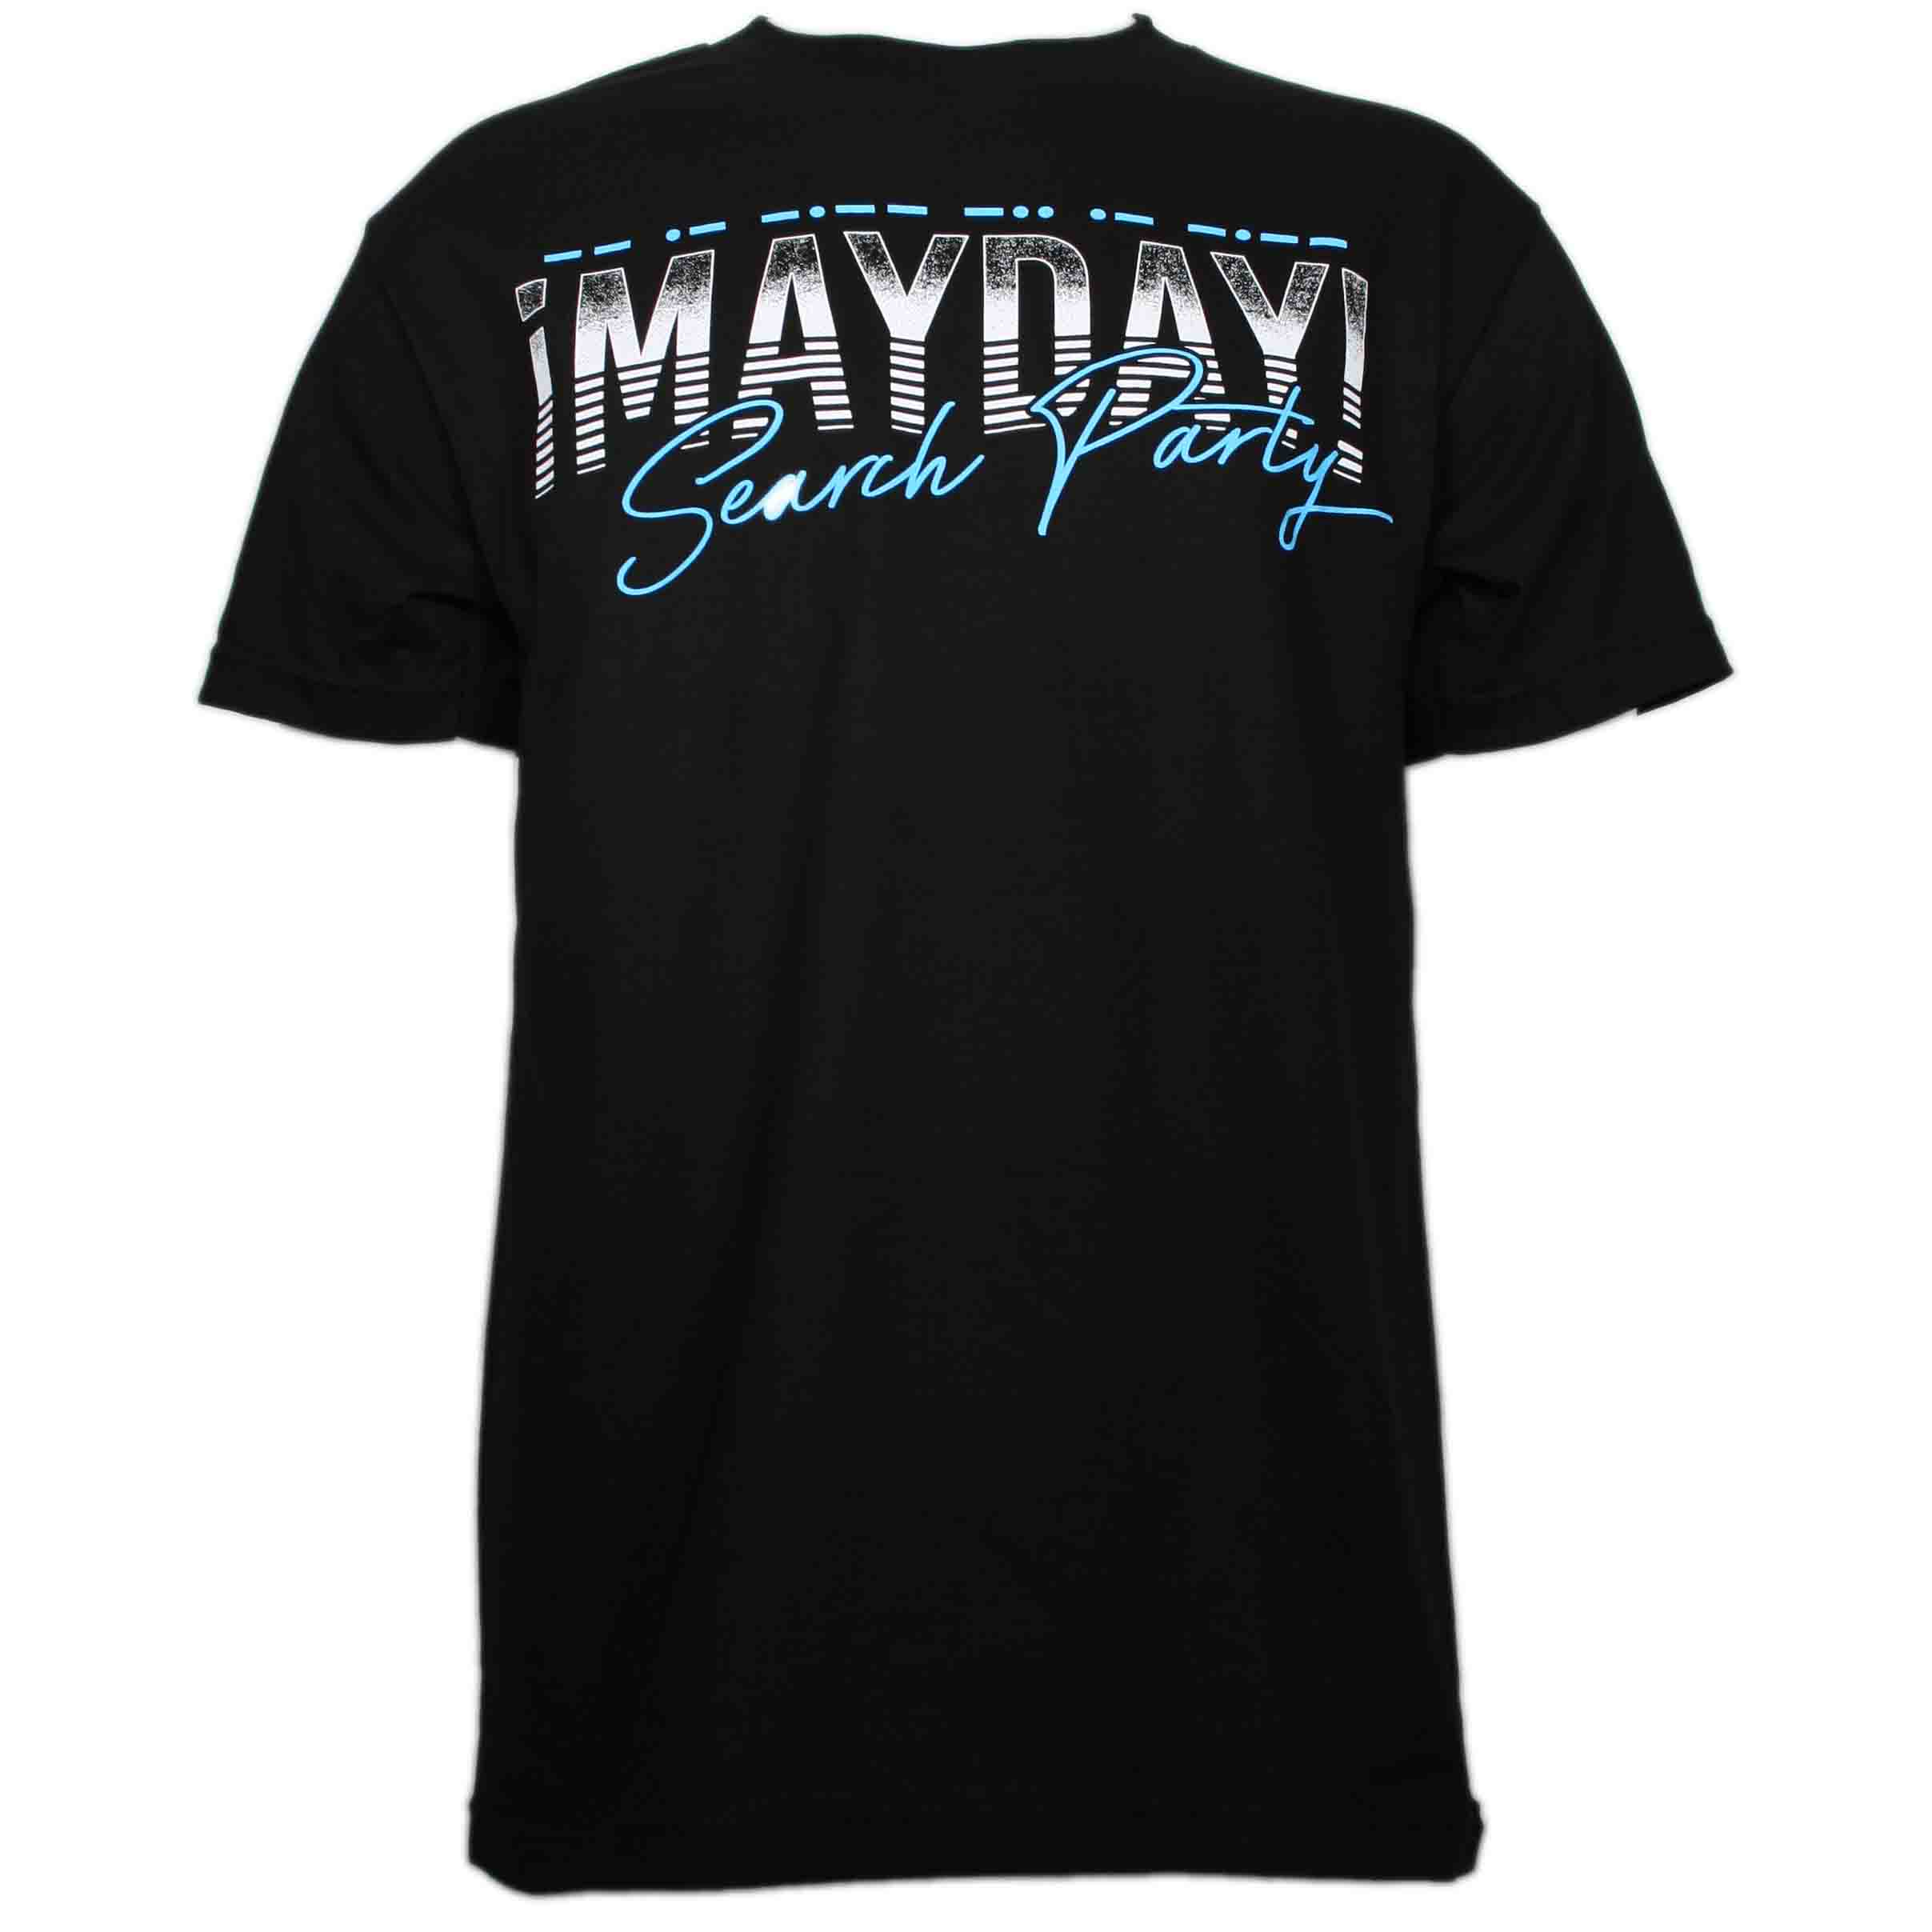 ¡MAYDAY!  - Black Search Party T-Shirt